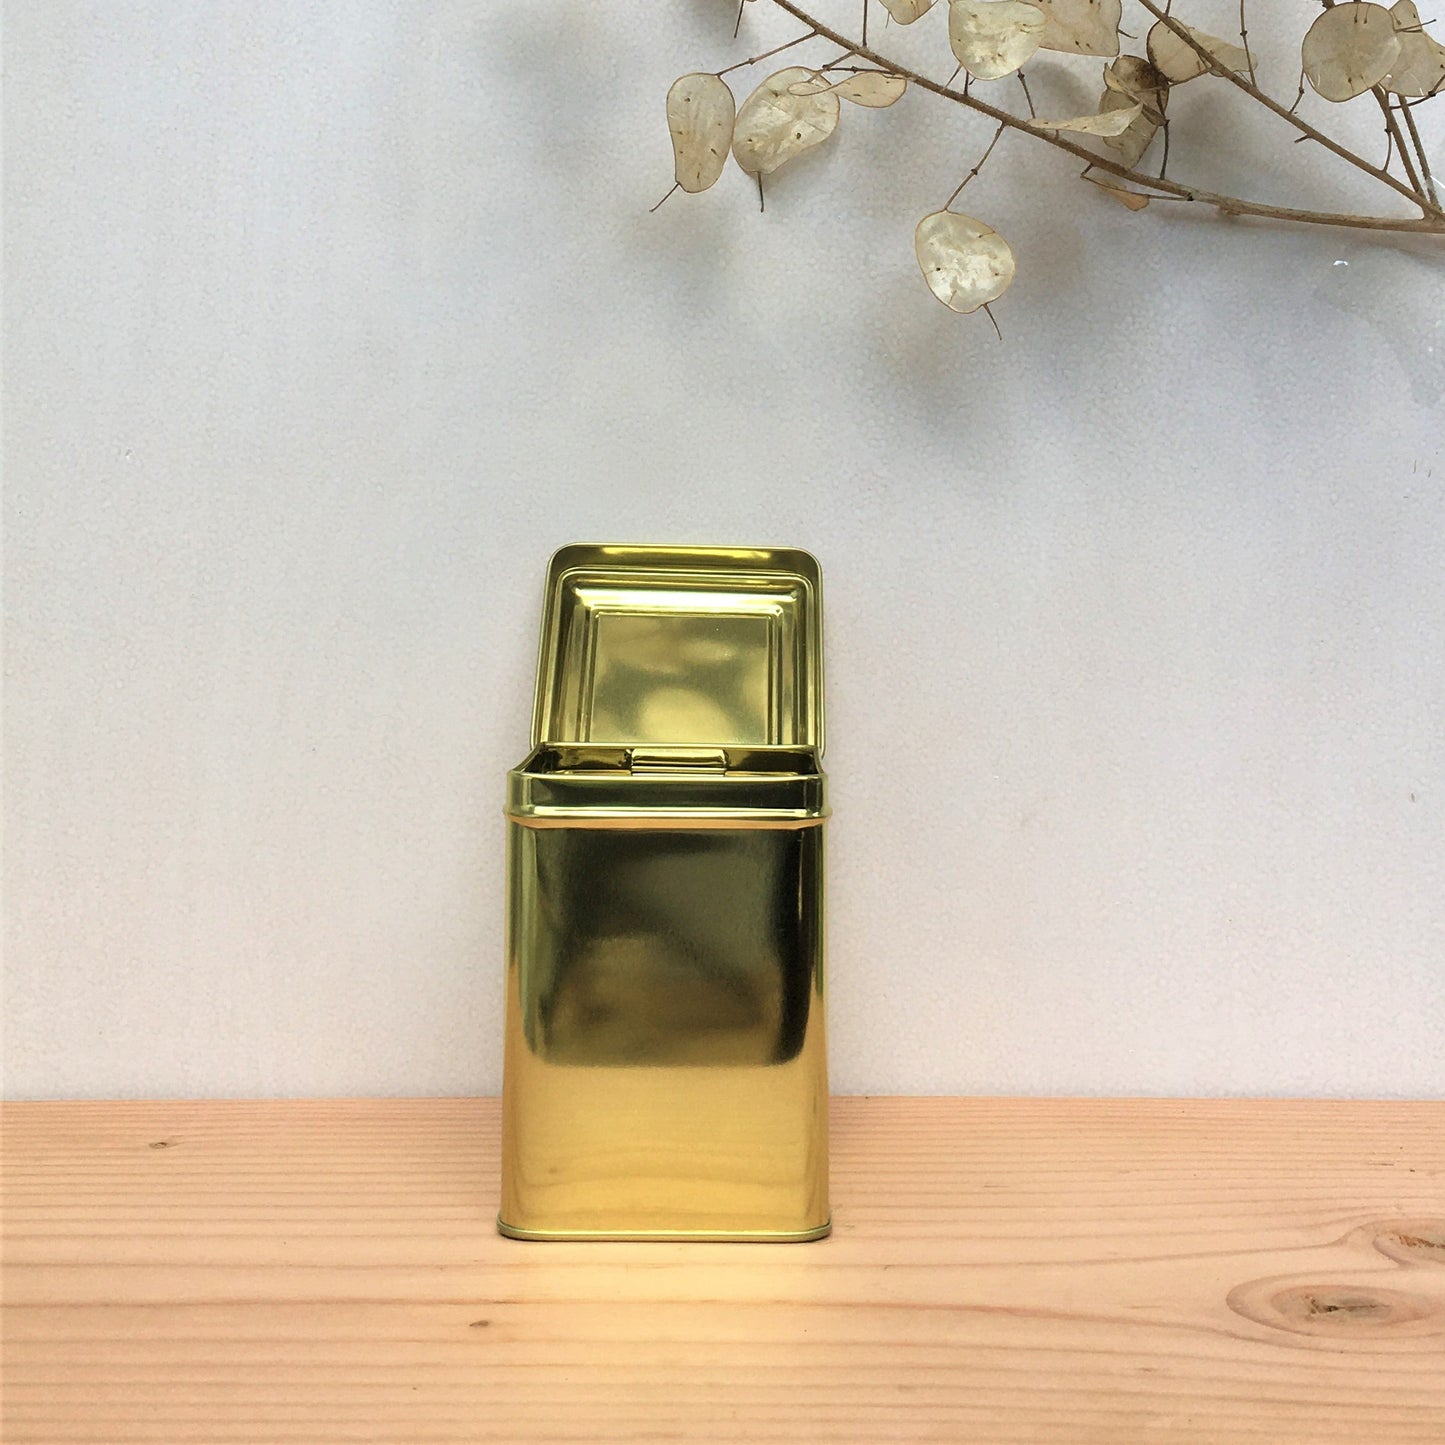 125-150g Gold Square Tin w/ Hinged Lid